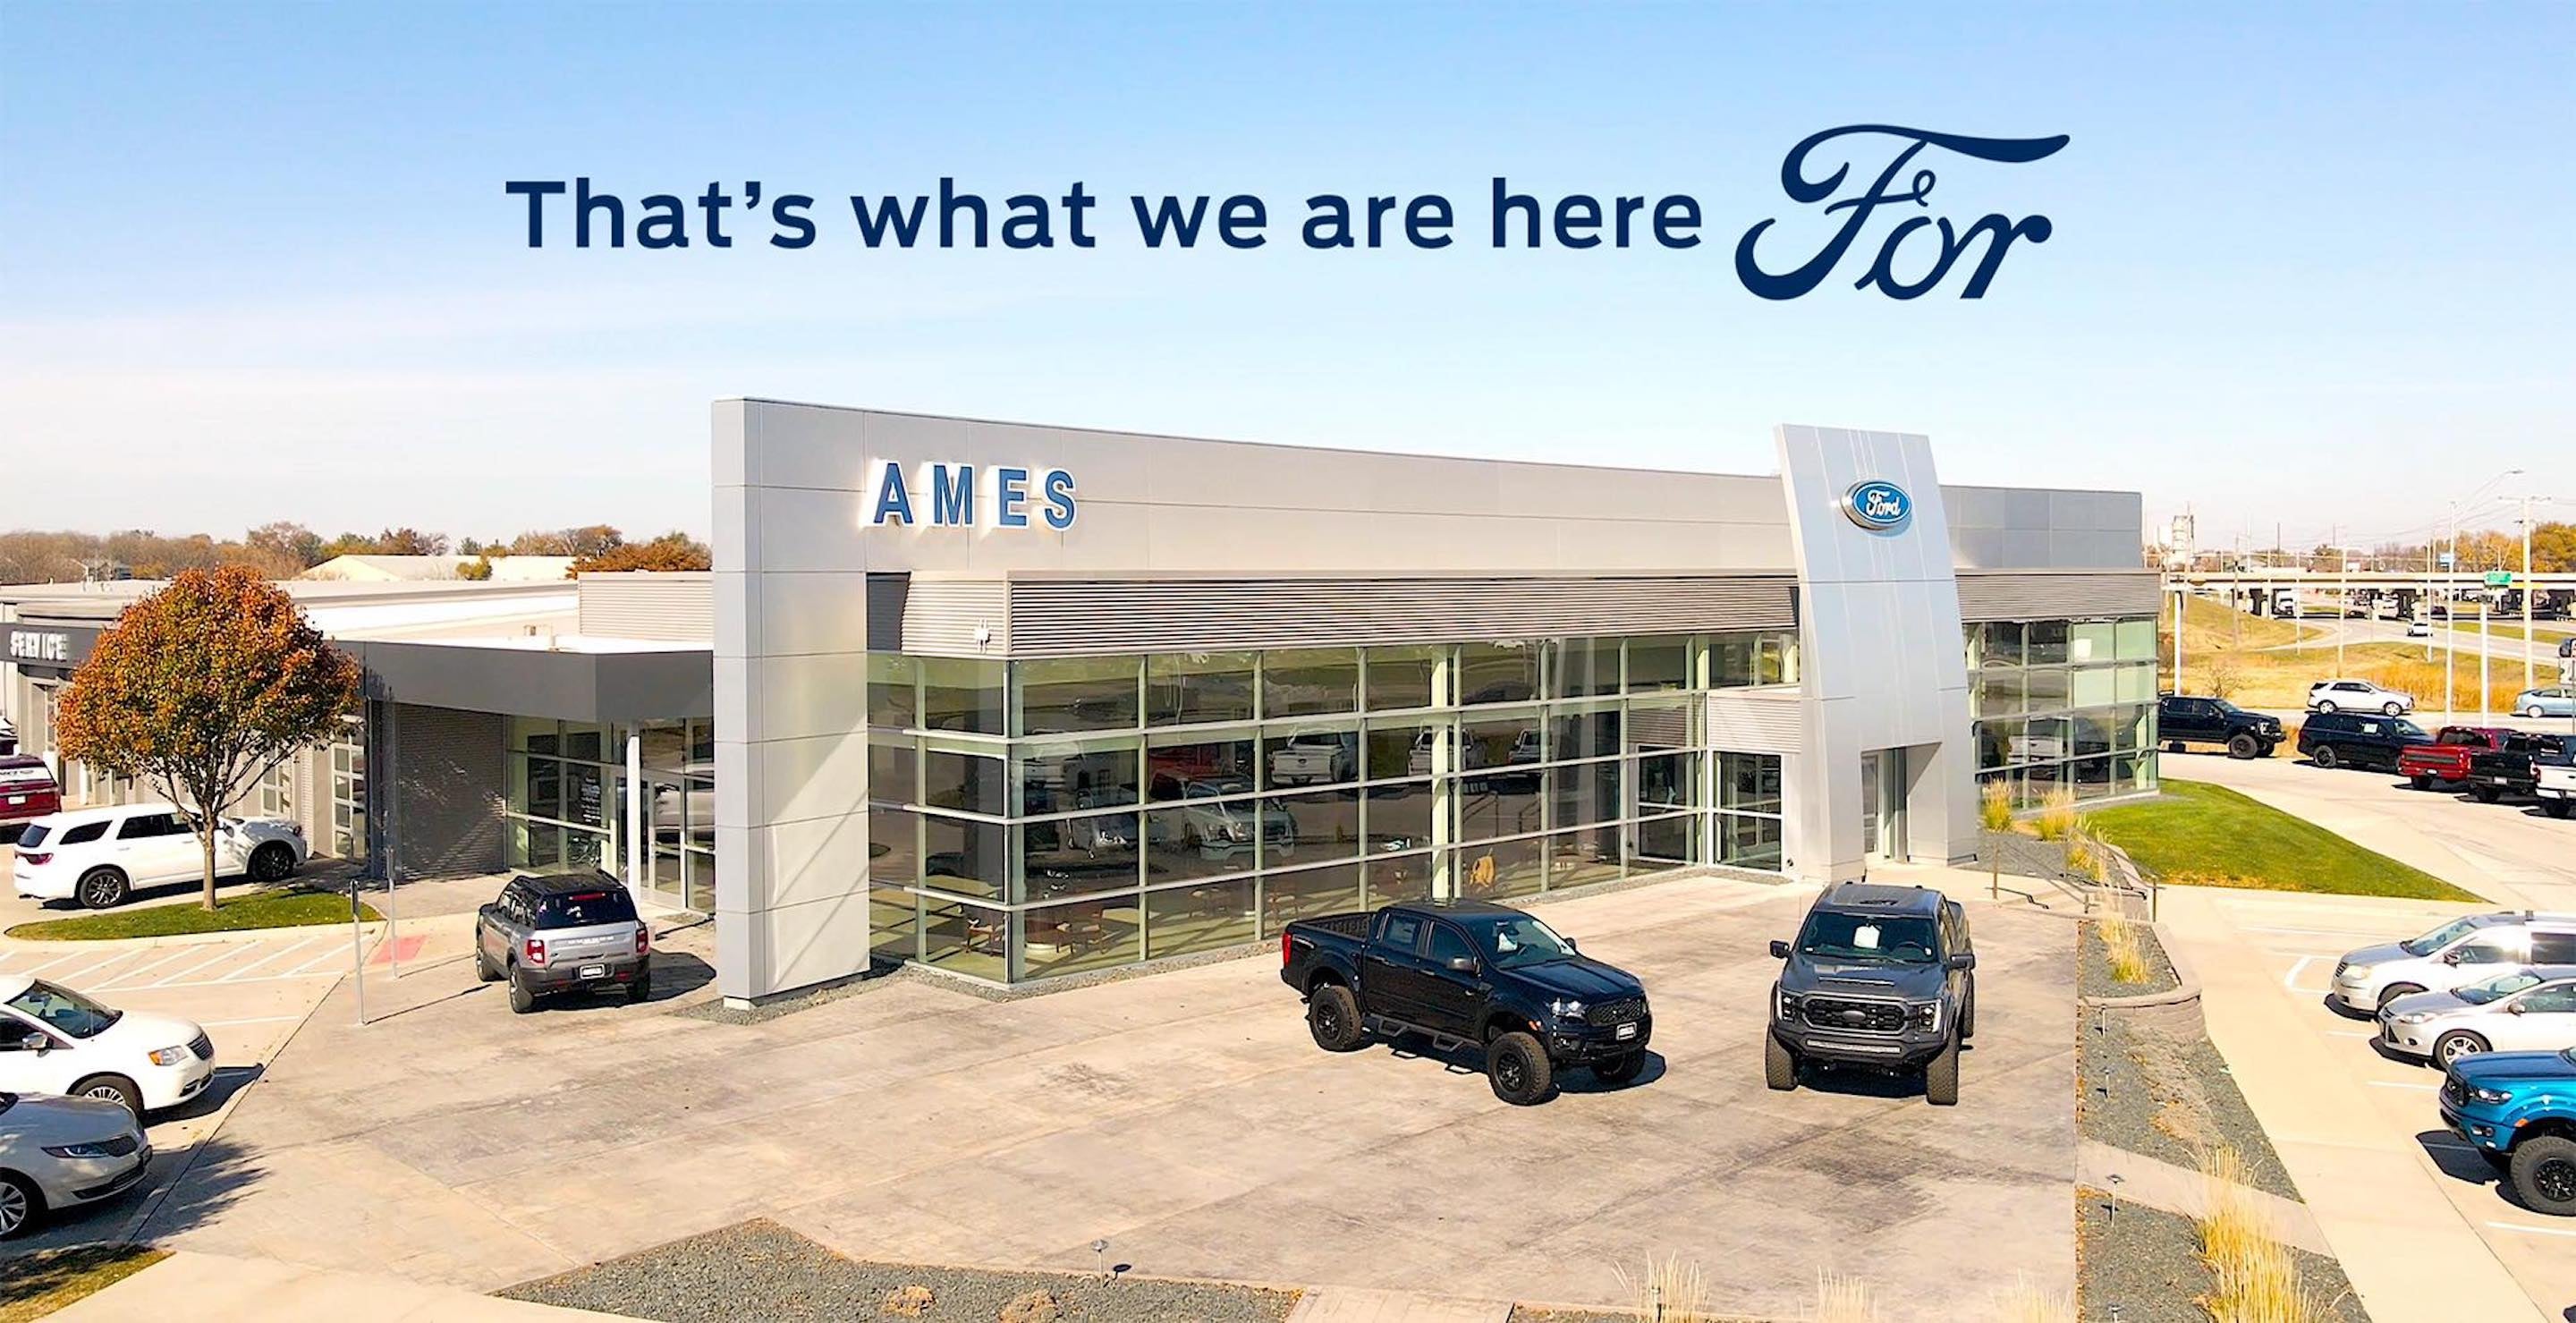 Dealership slogan over picture of two people